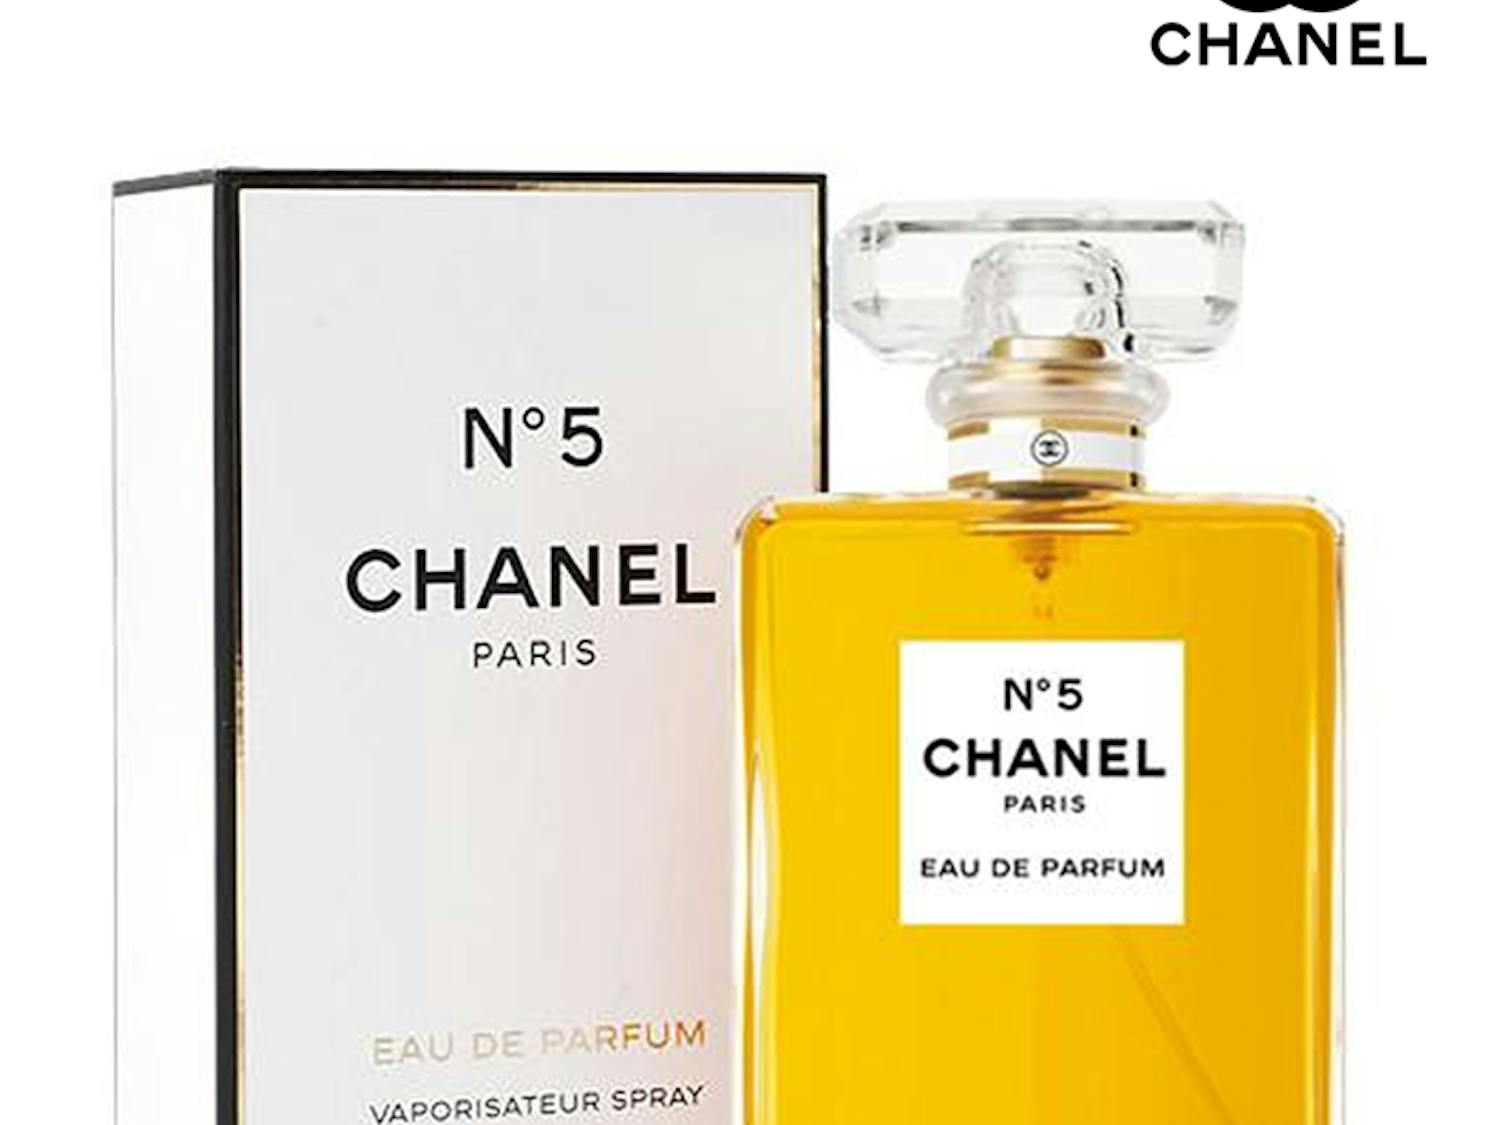 French filmmaker Jean Pierre Jeunet worked previously on a campaign for Chanel No. 5 before his work on the New Chance Campaign. (Photo courtesy of Flickr / “Chanel N 5” by Kiki store / September 3, 2017)